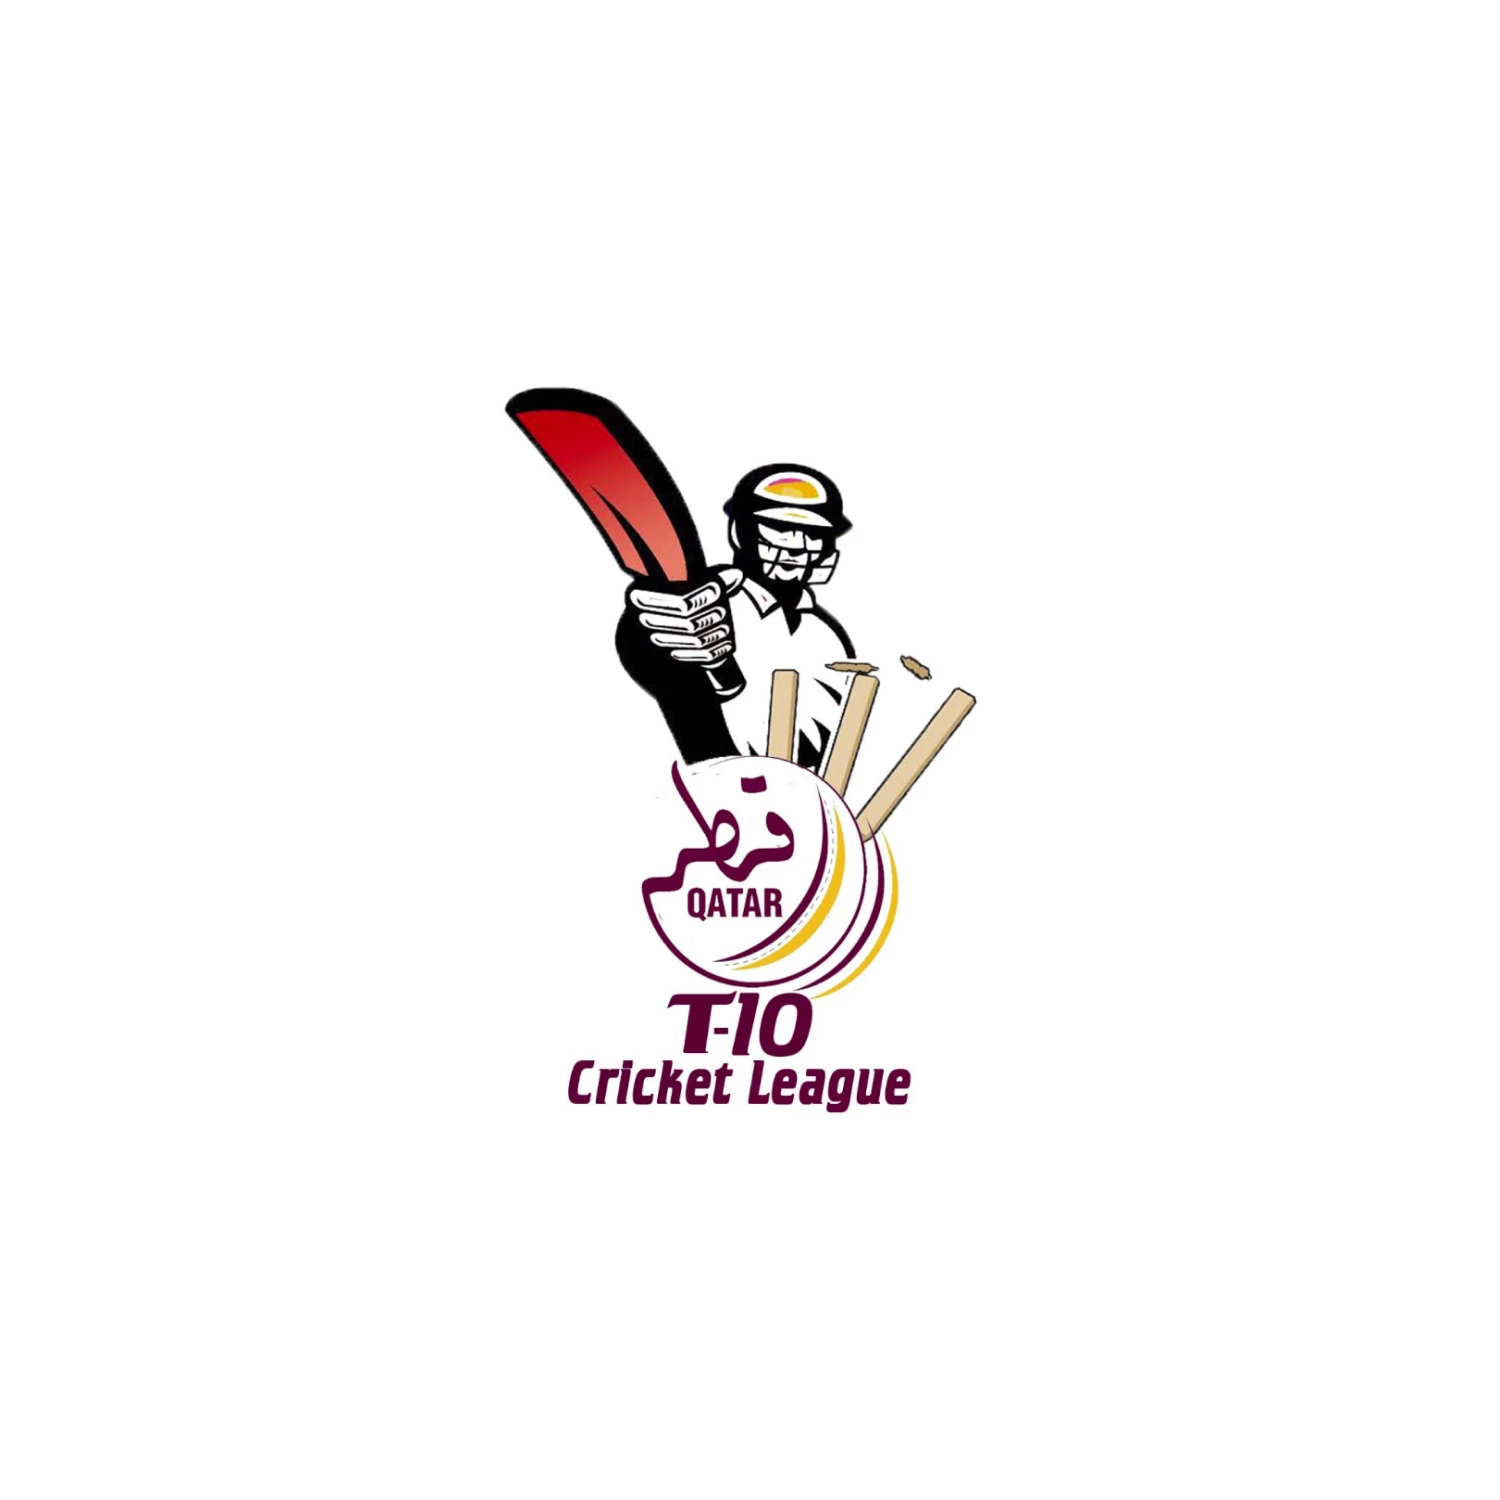 Find out more about the Qatar T10 League.